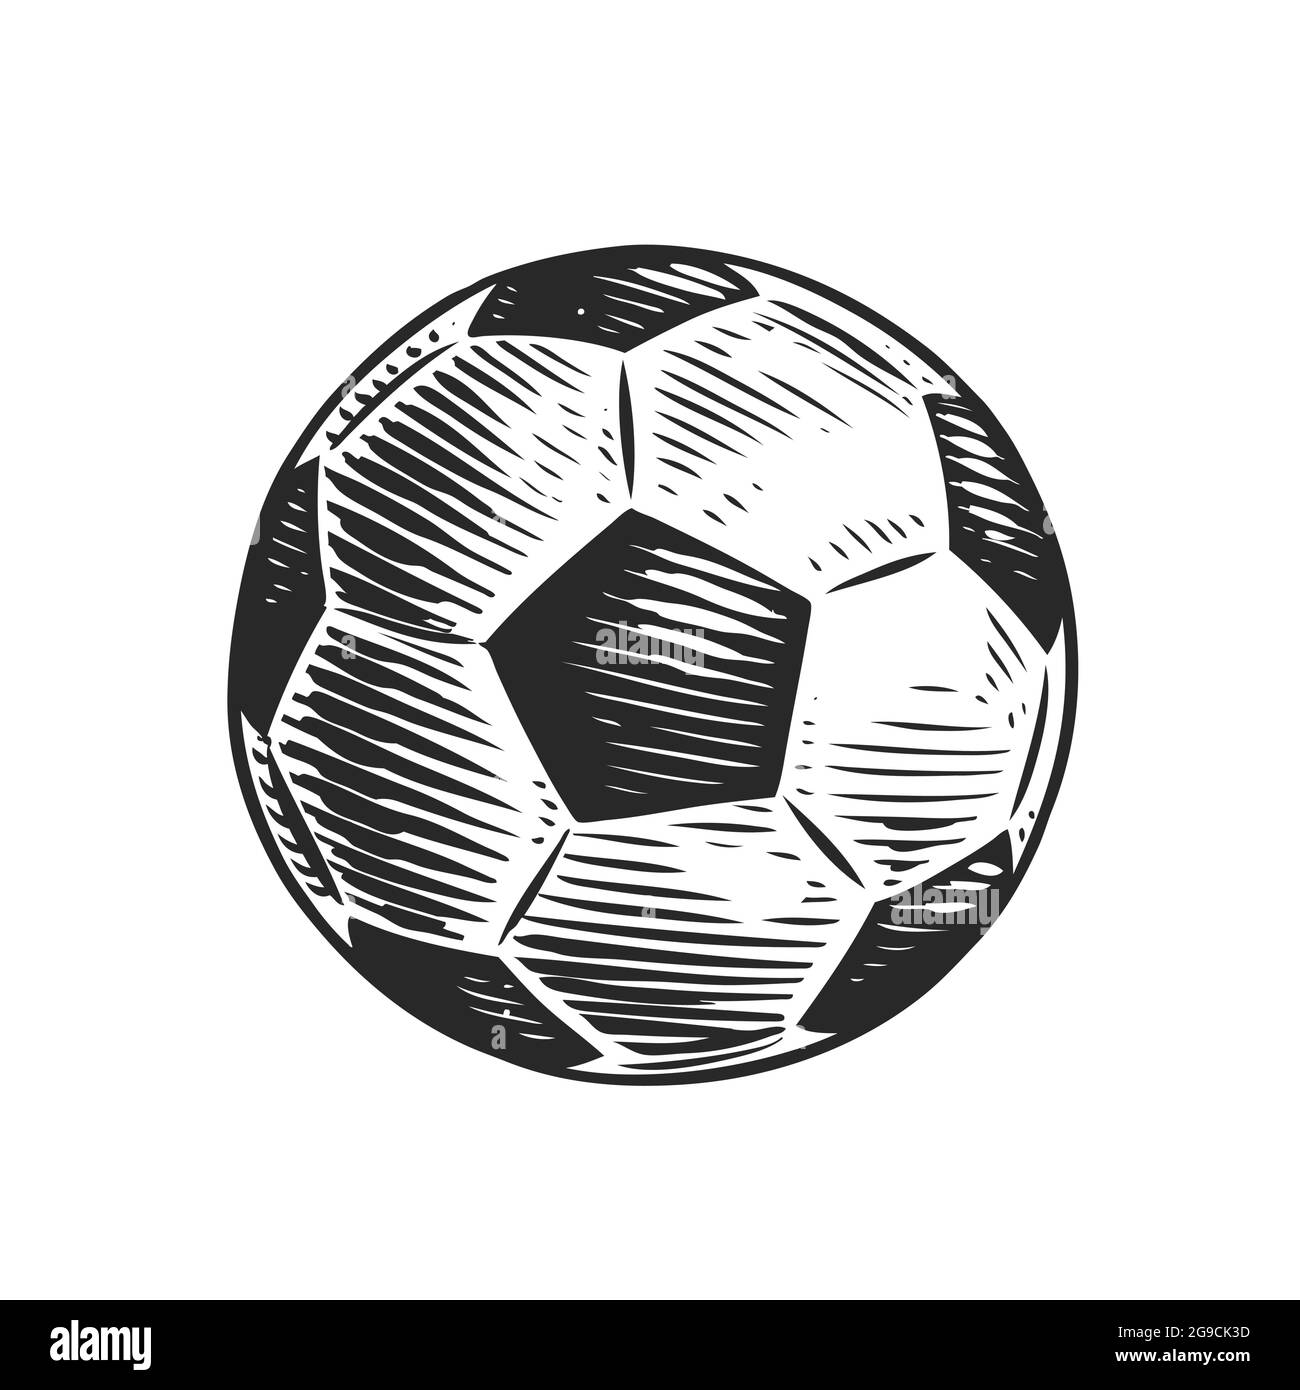 Football ball on white. Hand drawn sketch in vintage style. Vector illustration Stock Vector